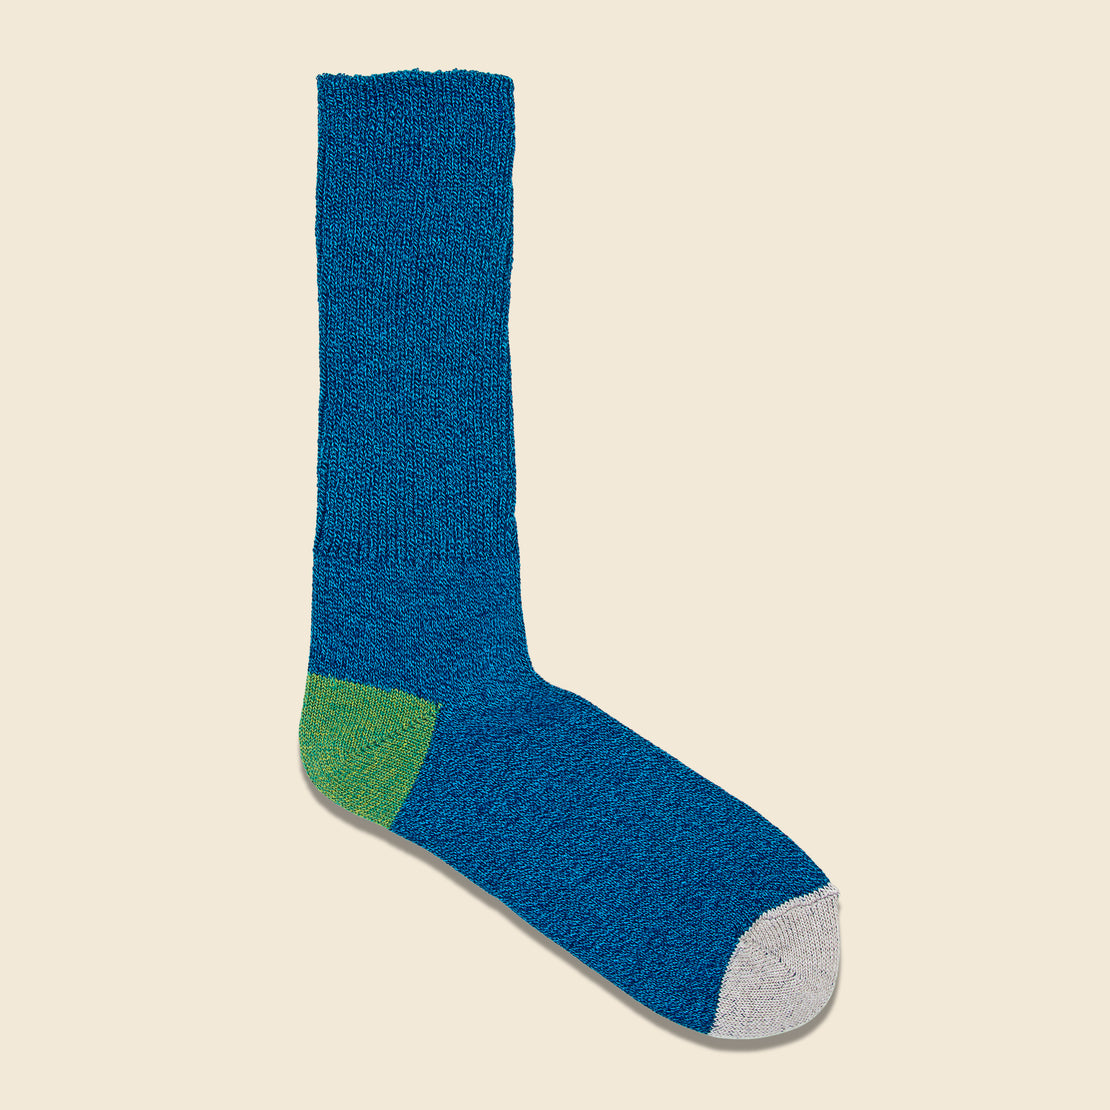 Anonymous Ism 2-Point Heel/Toe Crew Sock - Blue/Green/White